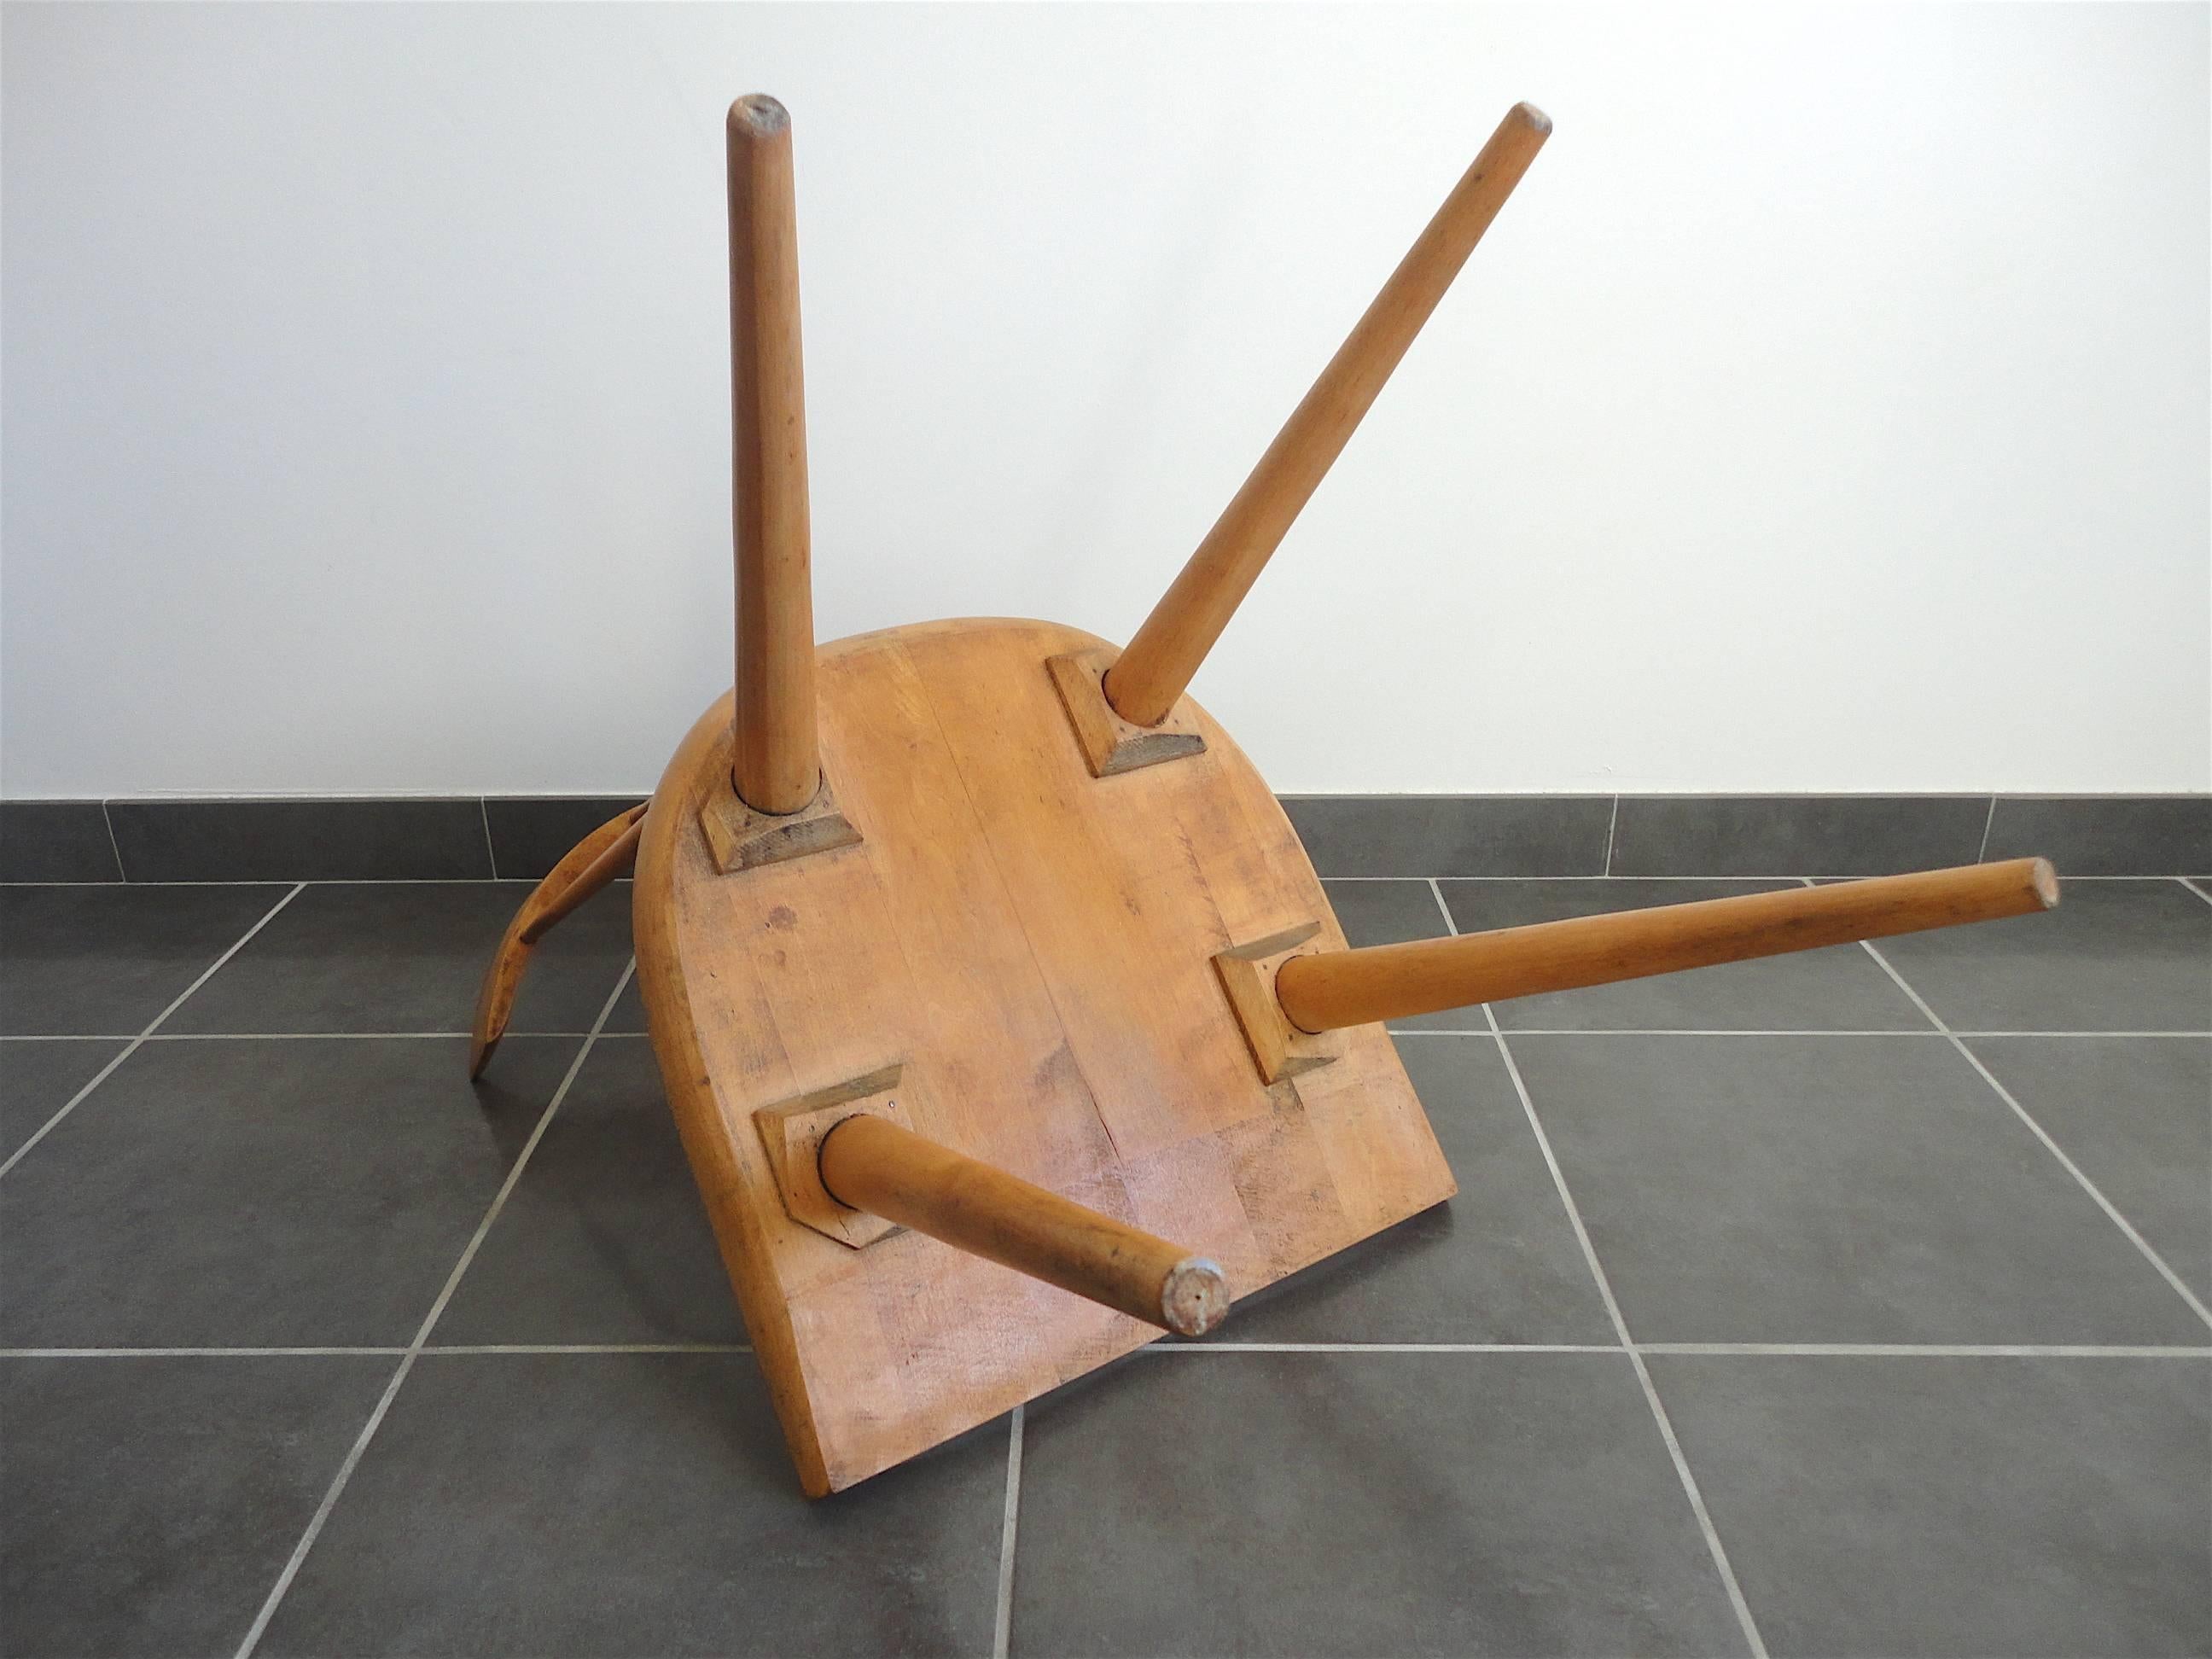 Mid-20th Century Spindle Back Planner Group Chair by Paul McCobb for Winchendon, 1950s For Sale